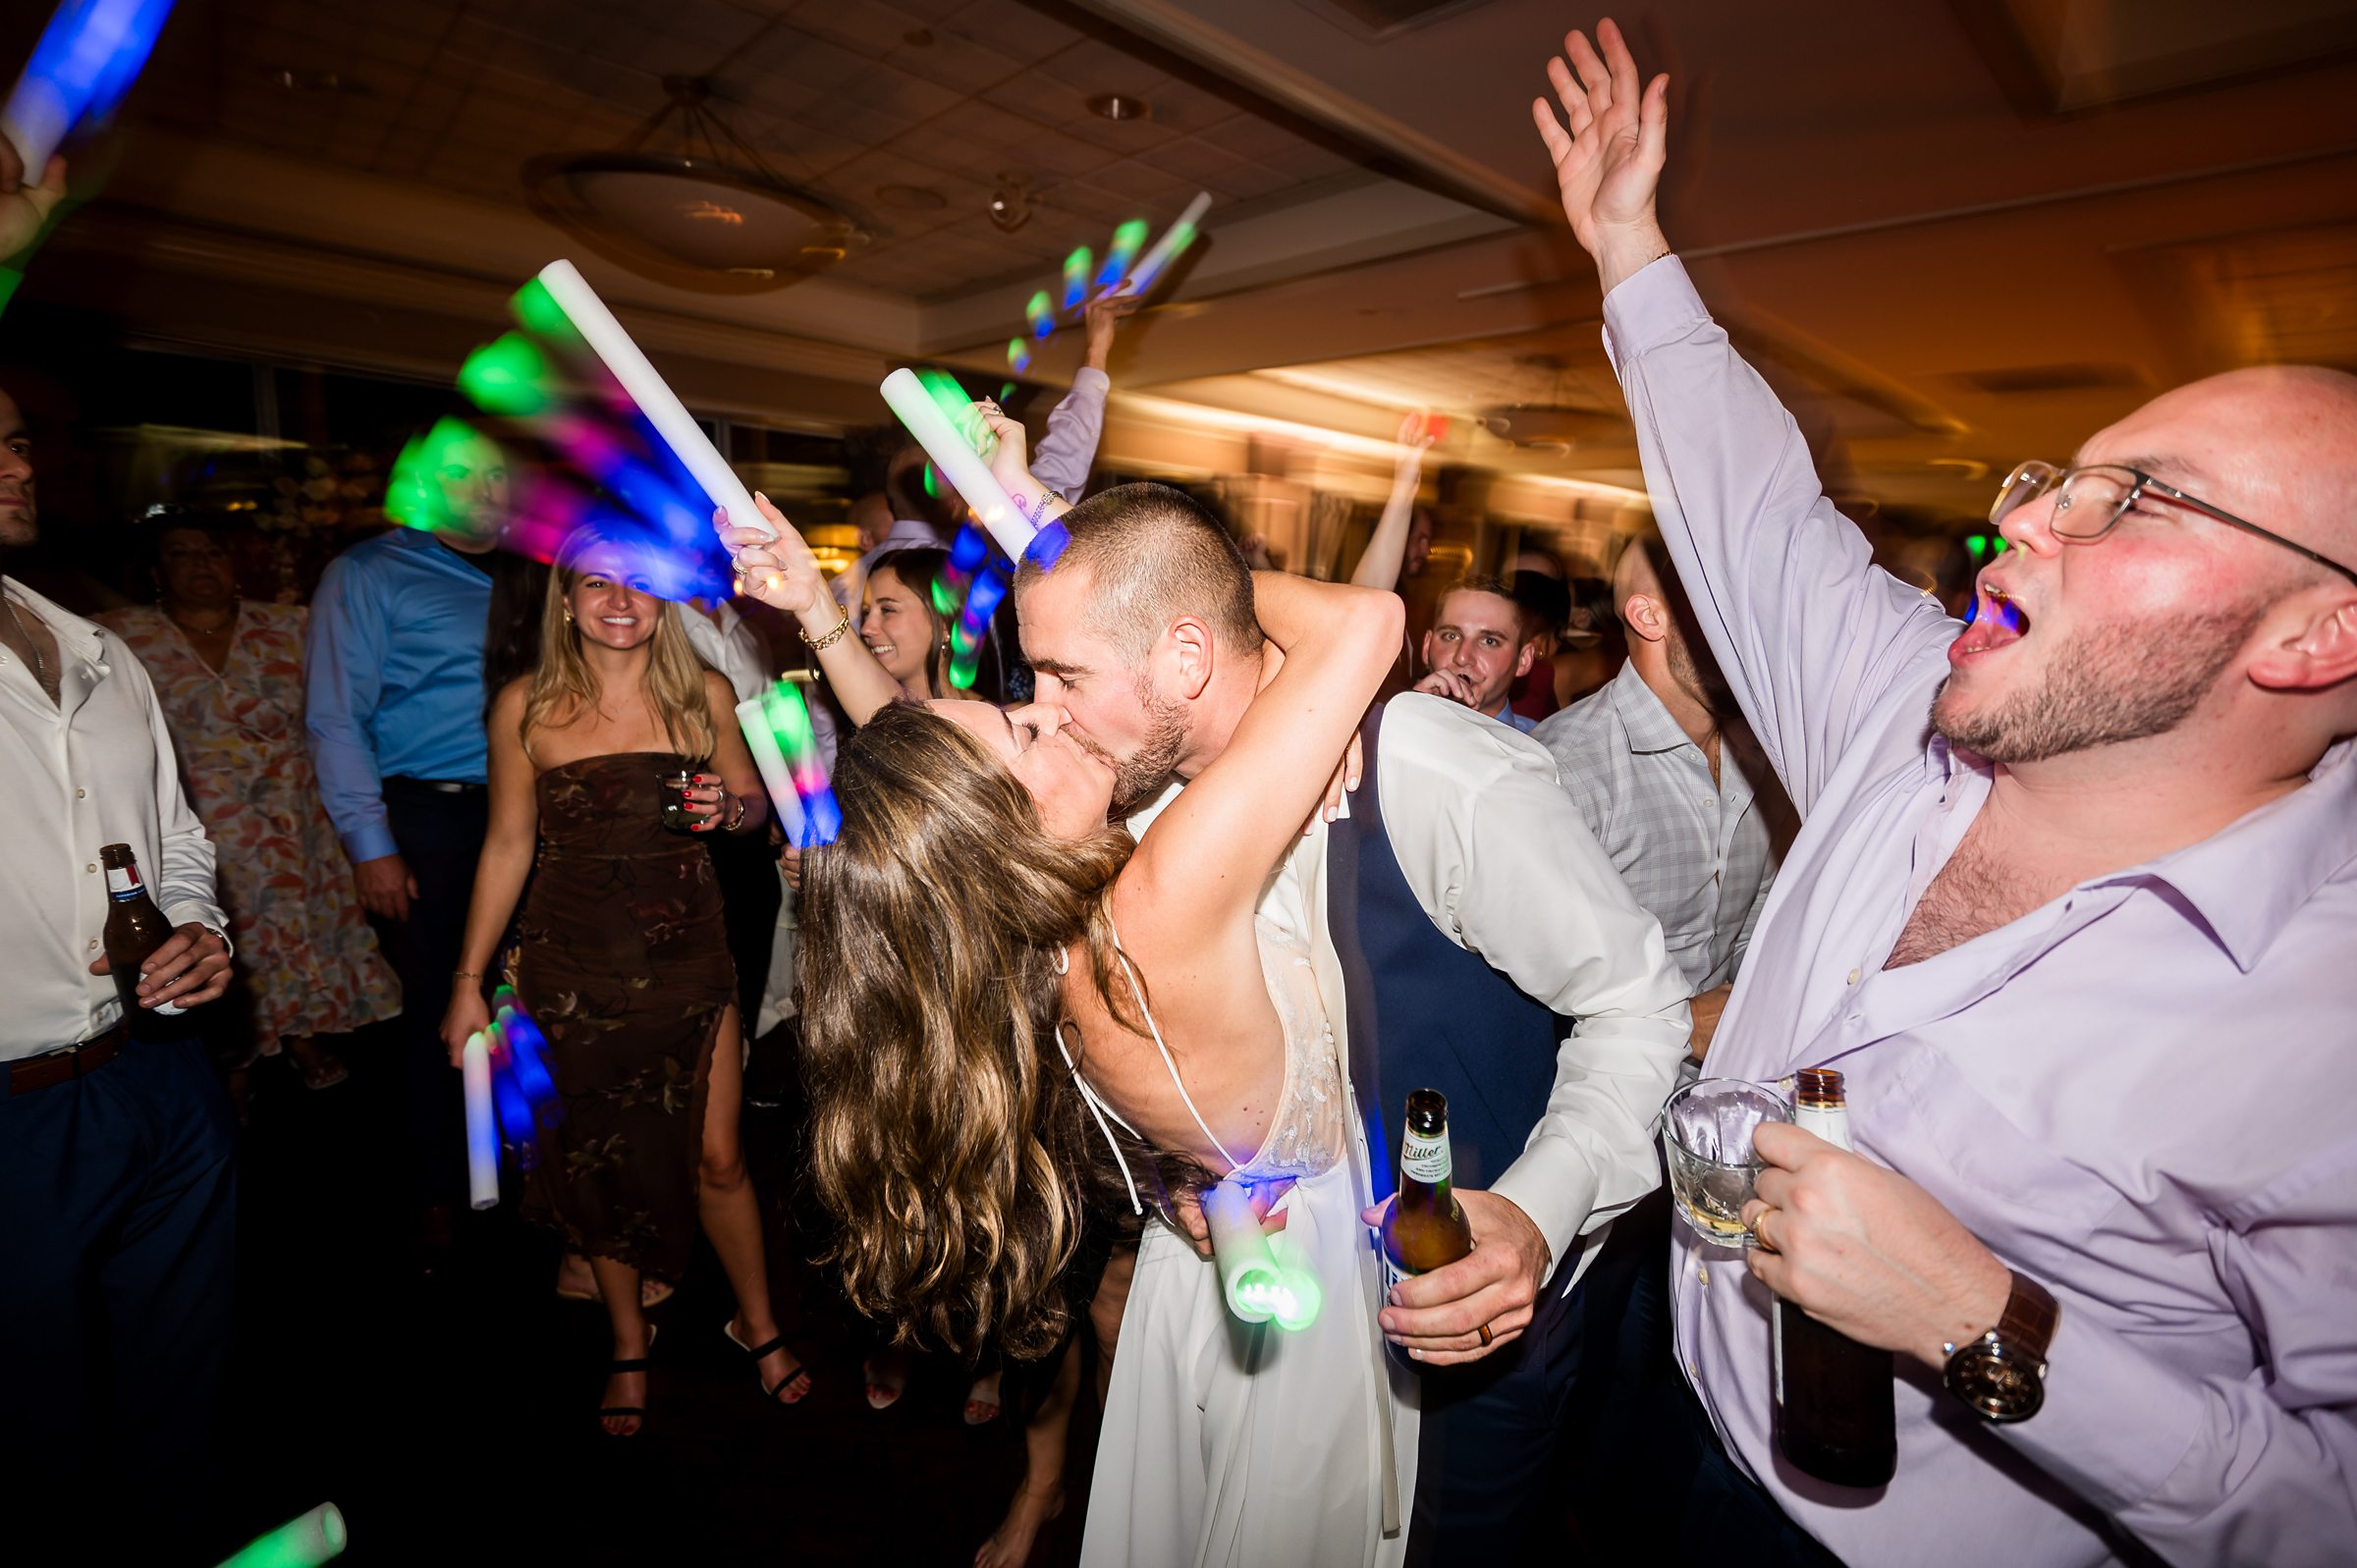 A couple is kissing on the dance floor during a lively party while surrounded by guests holding glowing sticks and a man to the right singing along with a drink in hand.